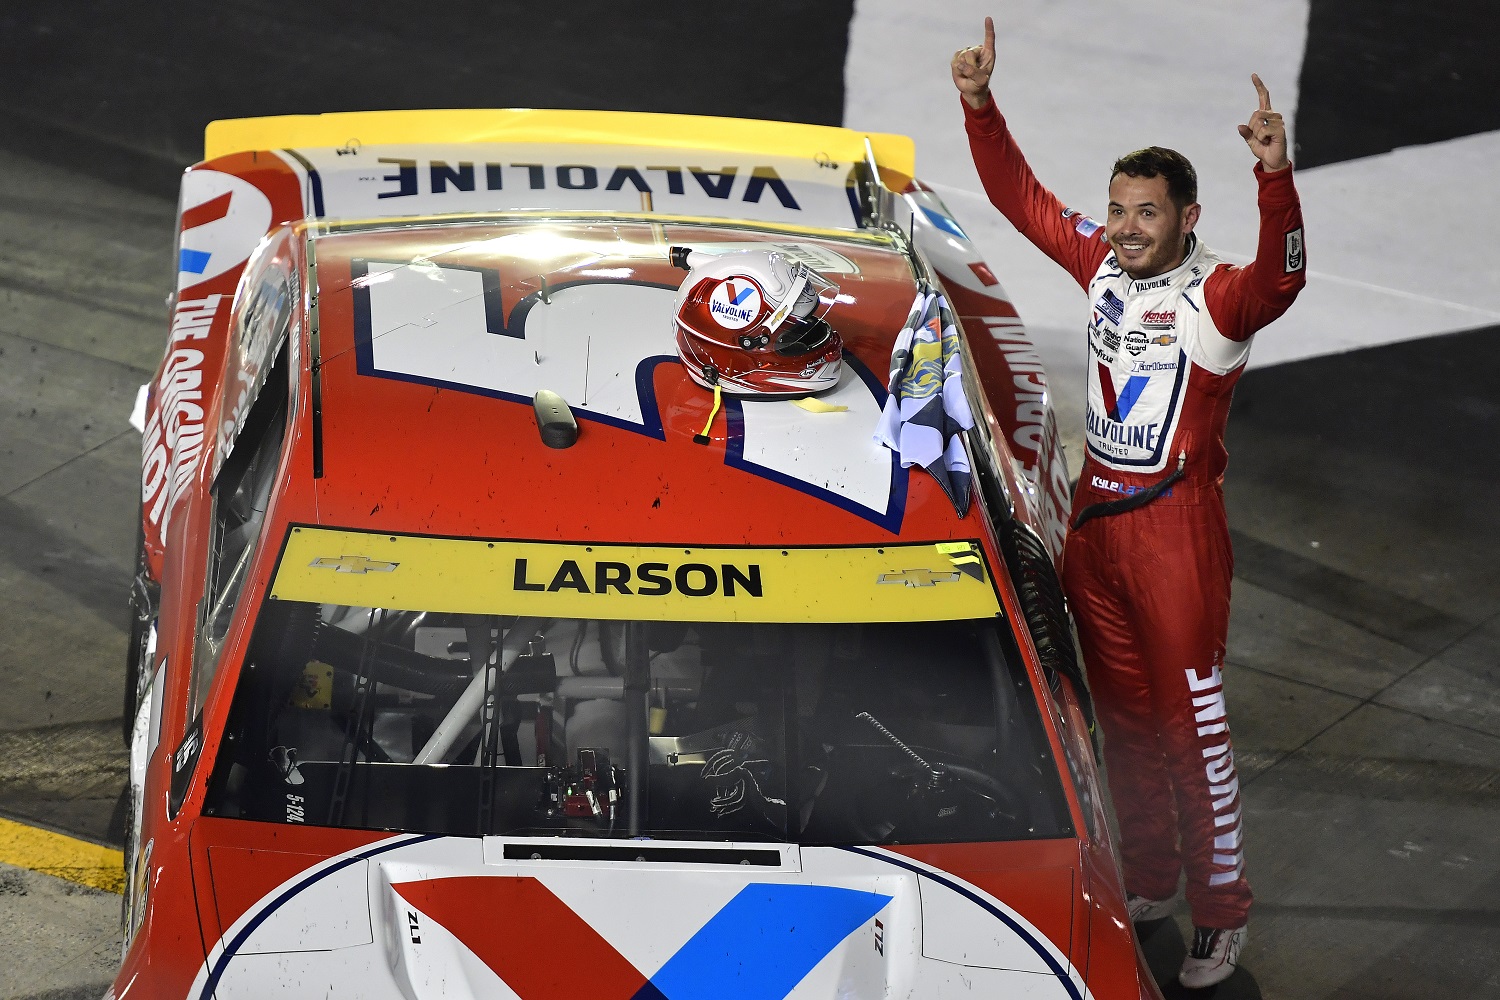 Kyle Larson, driver of the No. 5 Chevrolet, celebrates after winning the NASCAR Cup Series Bass Pro Shops Night Race at Bristol Motor Speedway on Sept. 18, 2021. | Logan Riely/Getty Images)